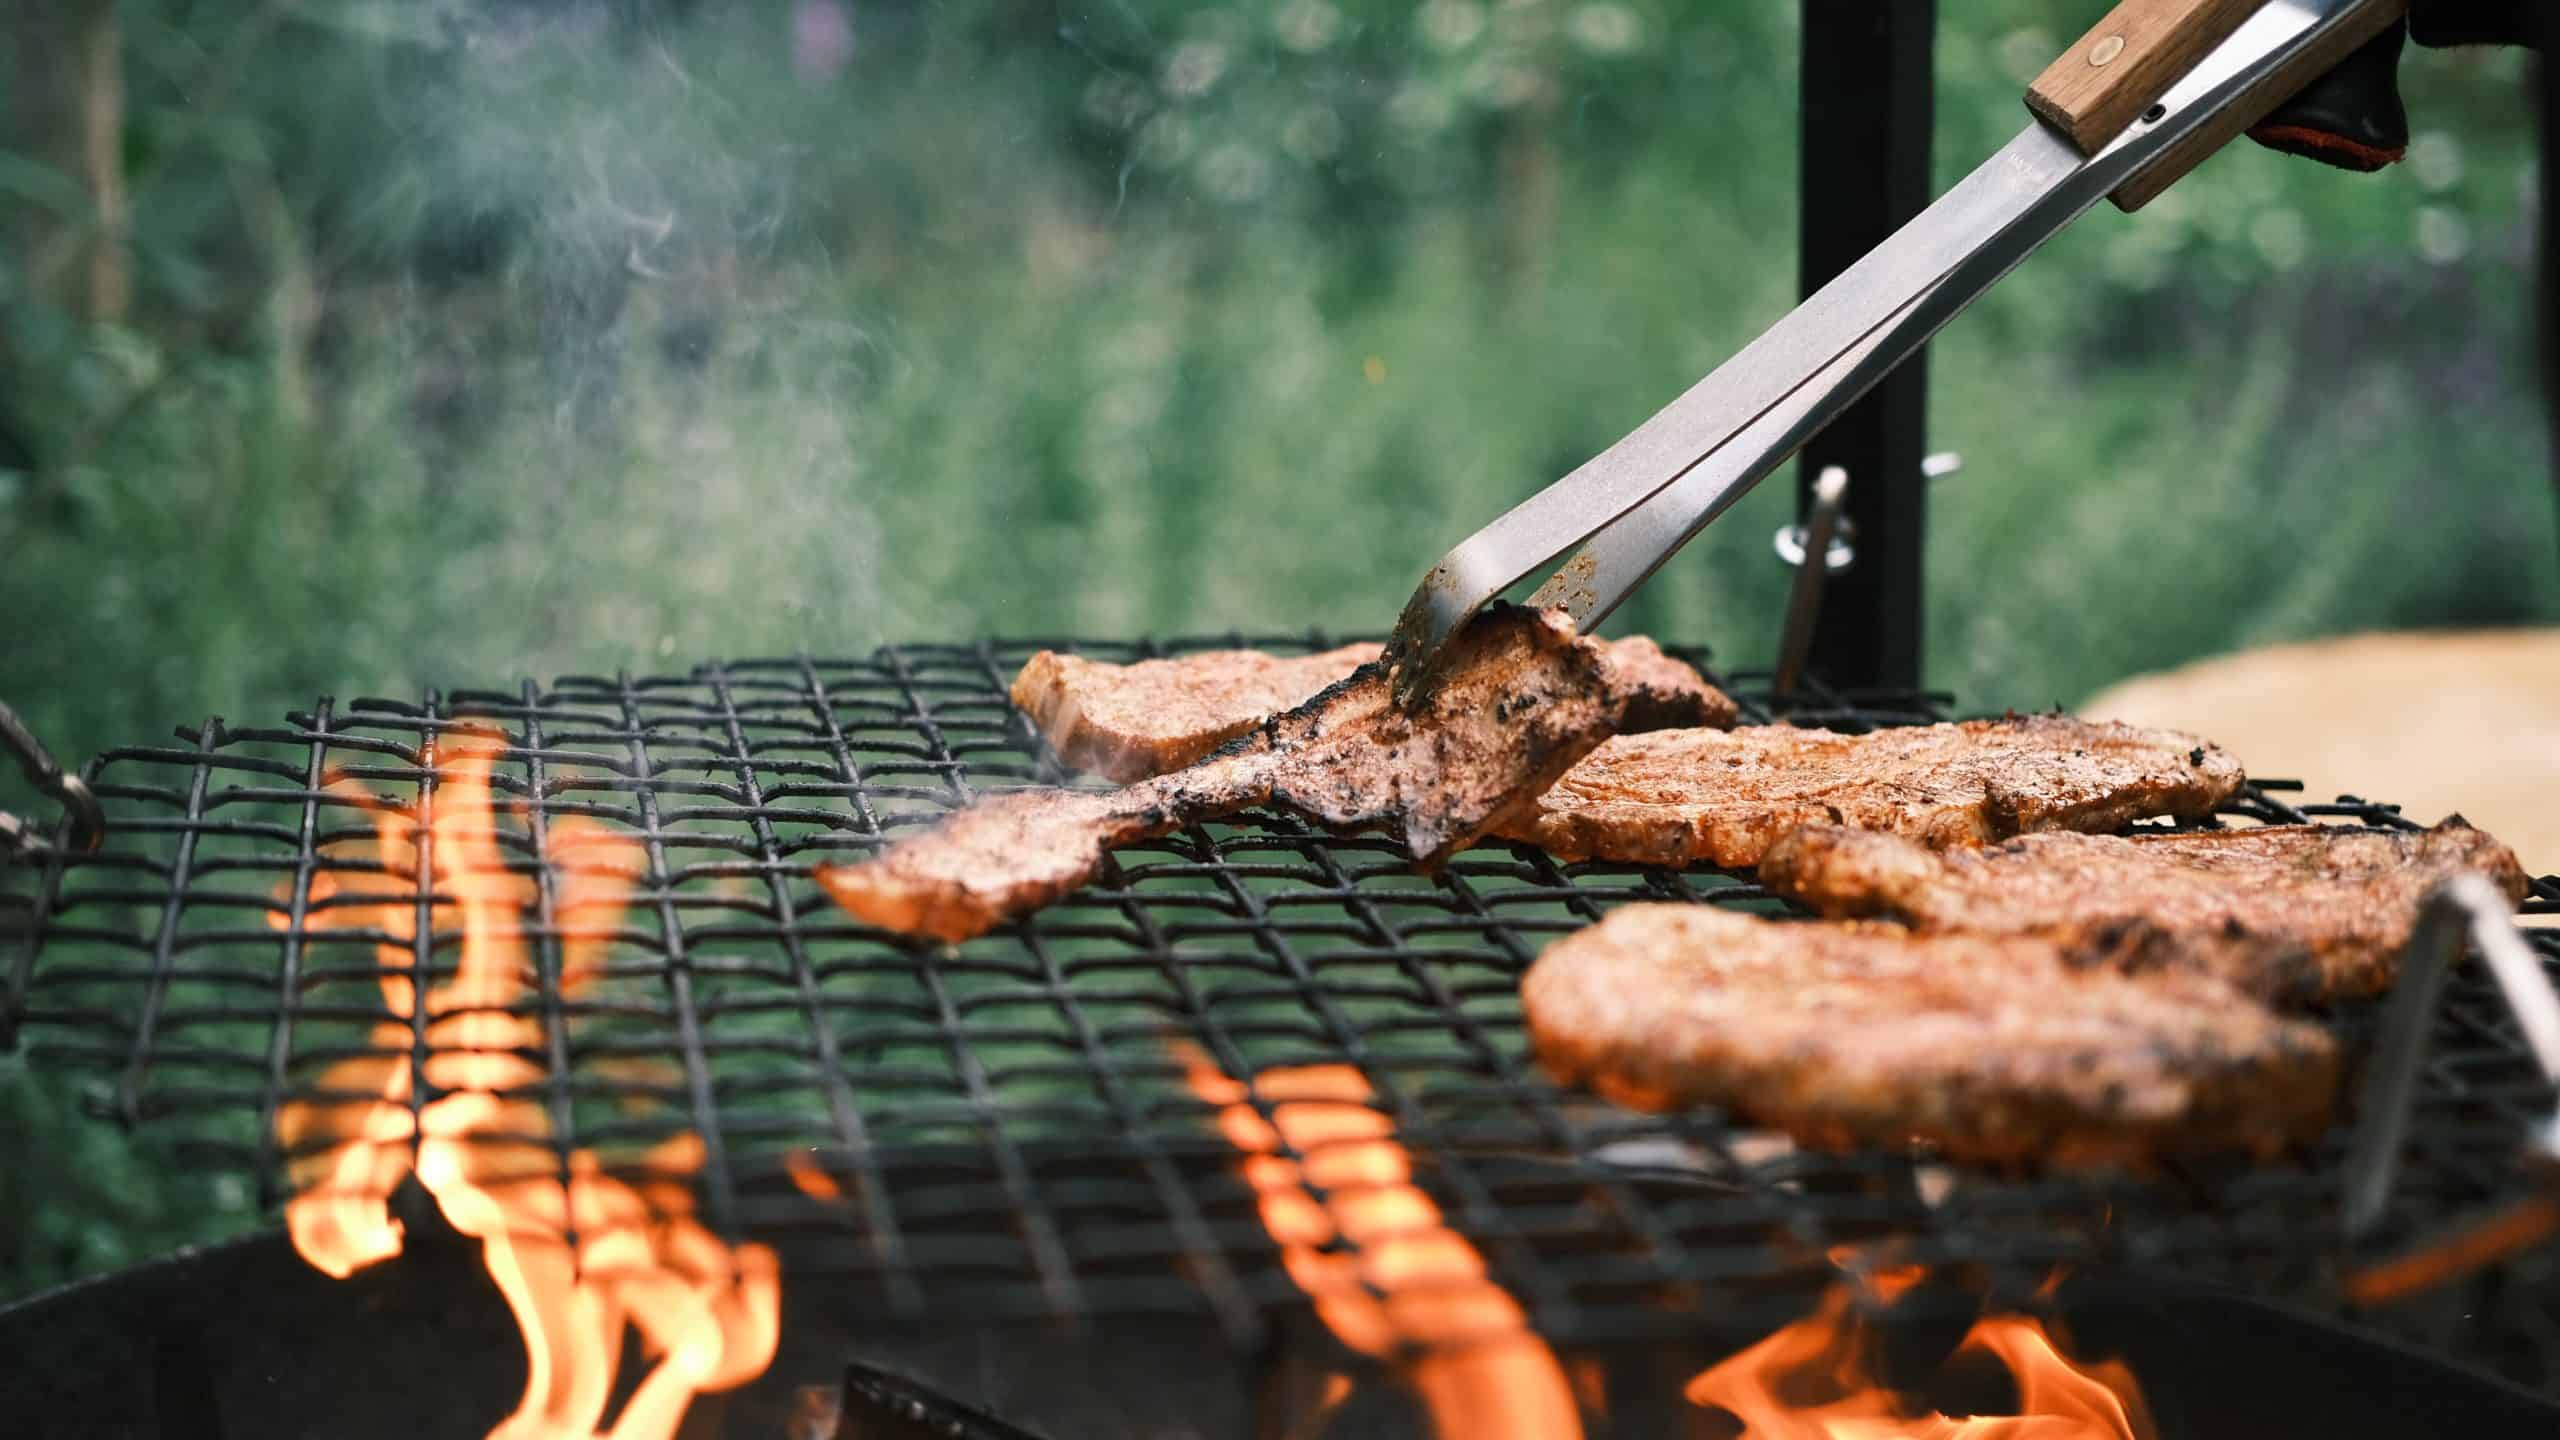 What Is The Best Grilling Meats And Cooking Tips?